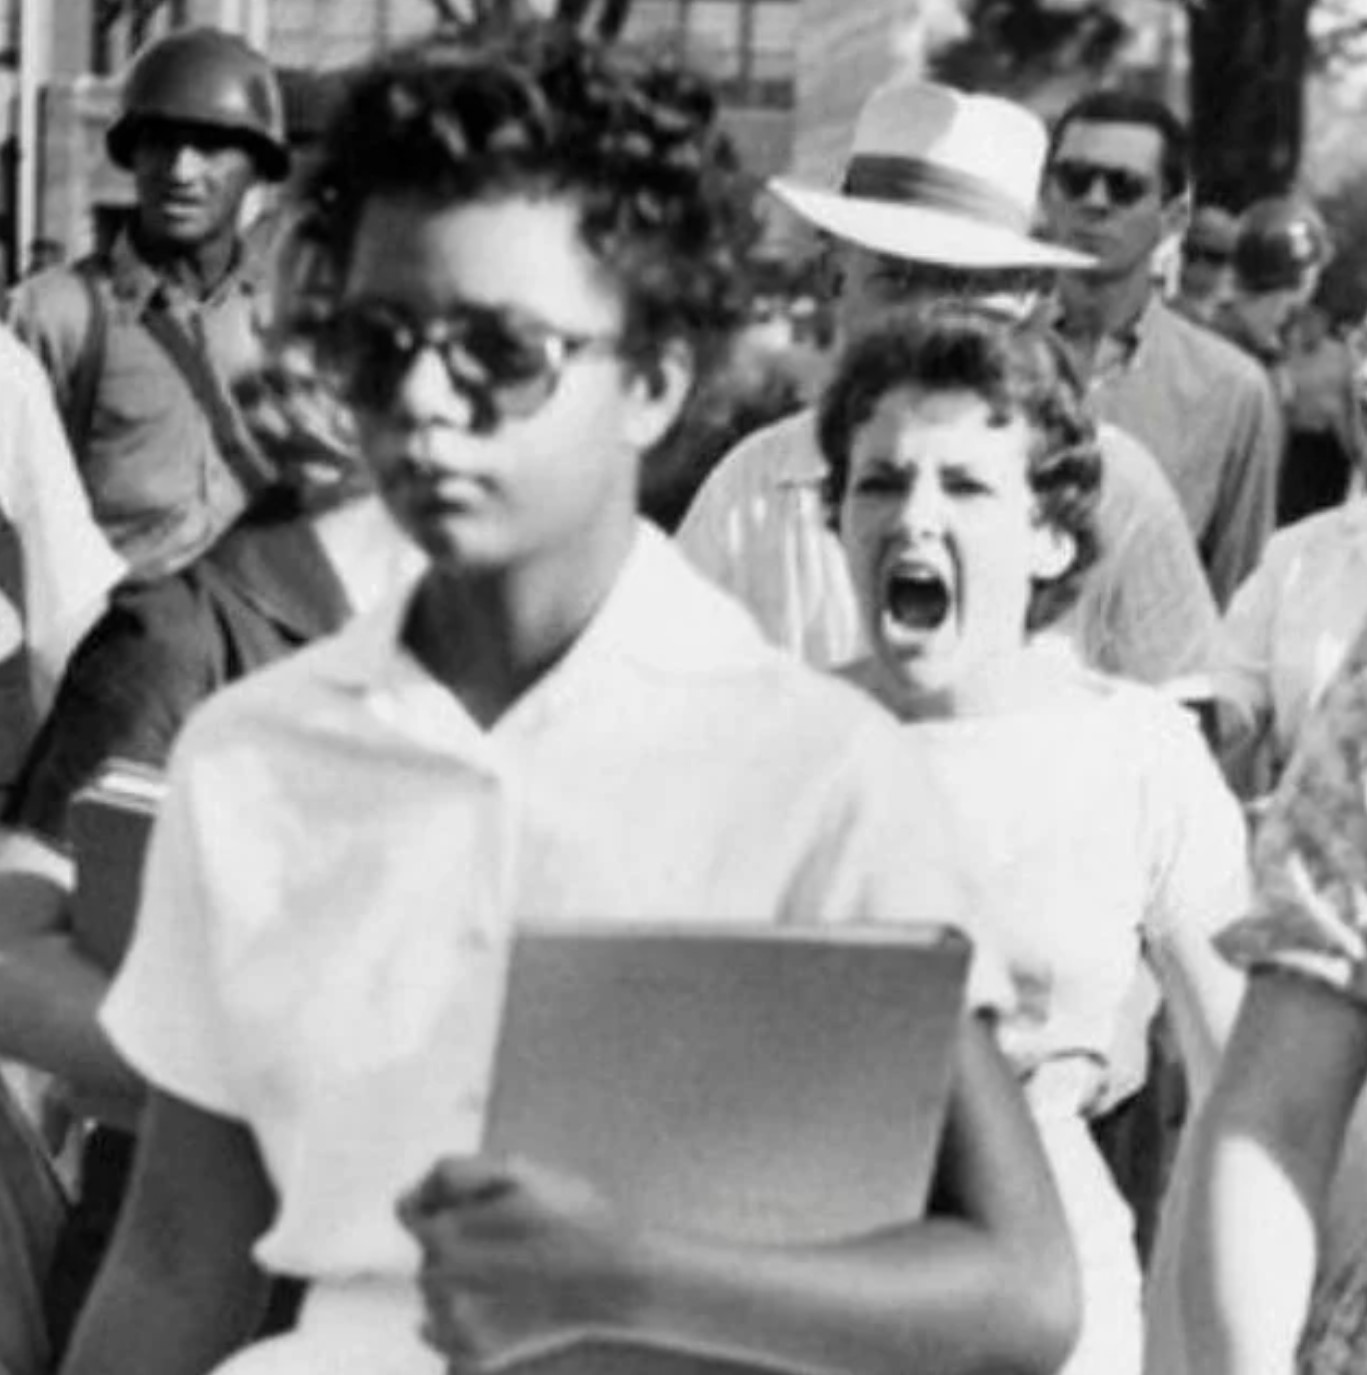 A student of color walking with a white student standing behind, yelling with an angry face.